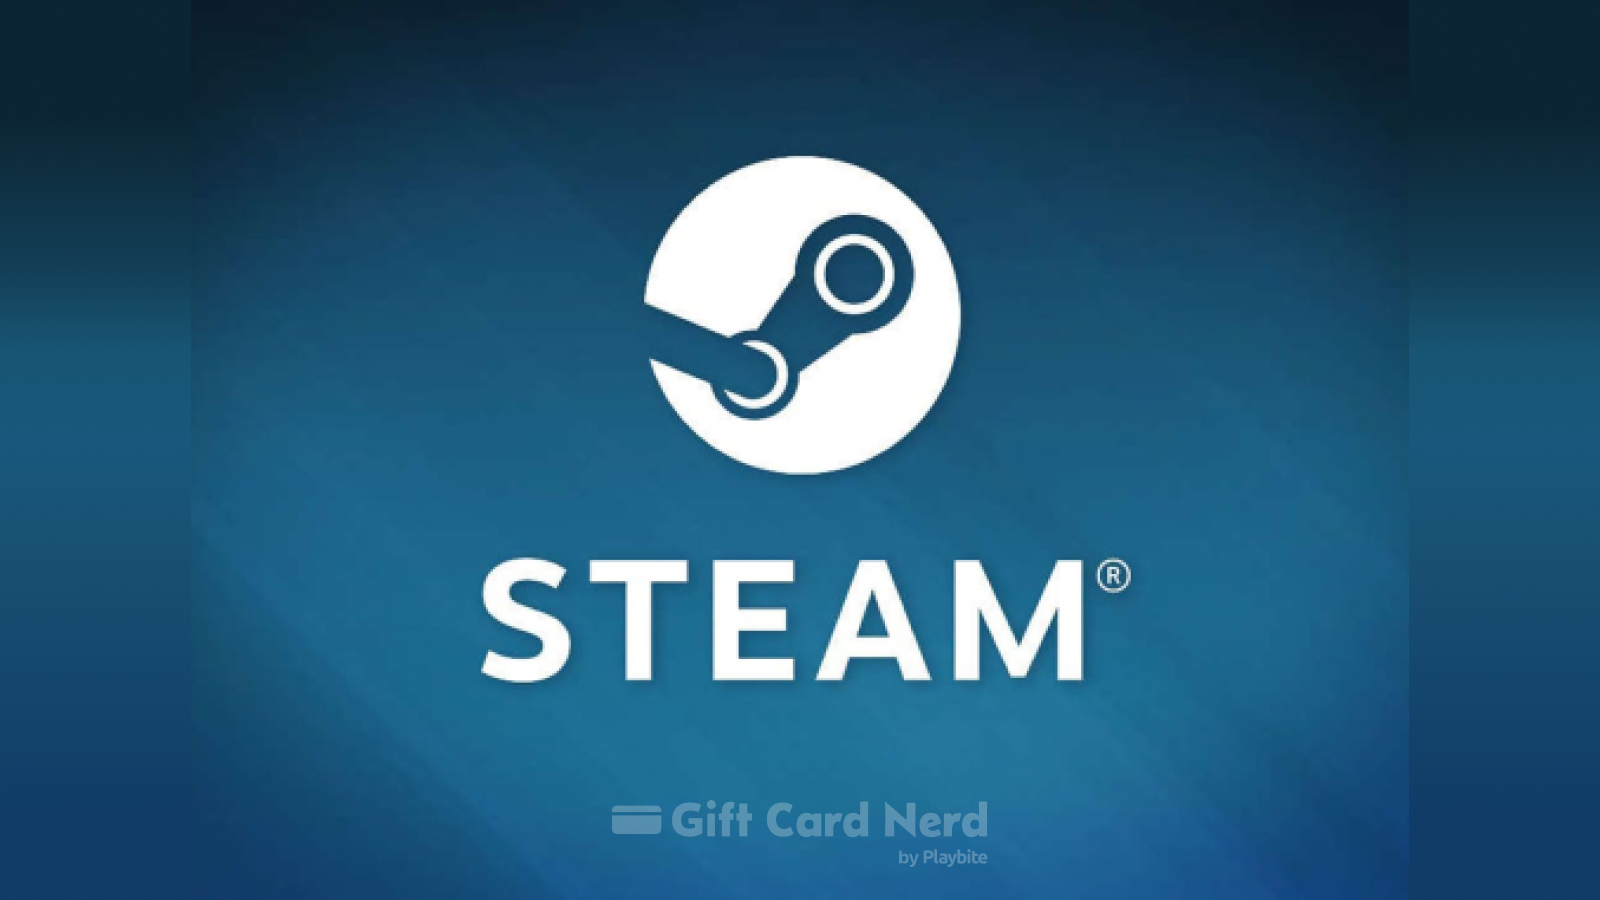 Can I use a Steam gift card on Google Play Store?